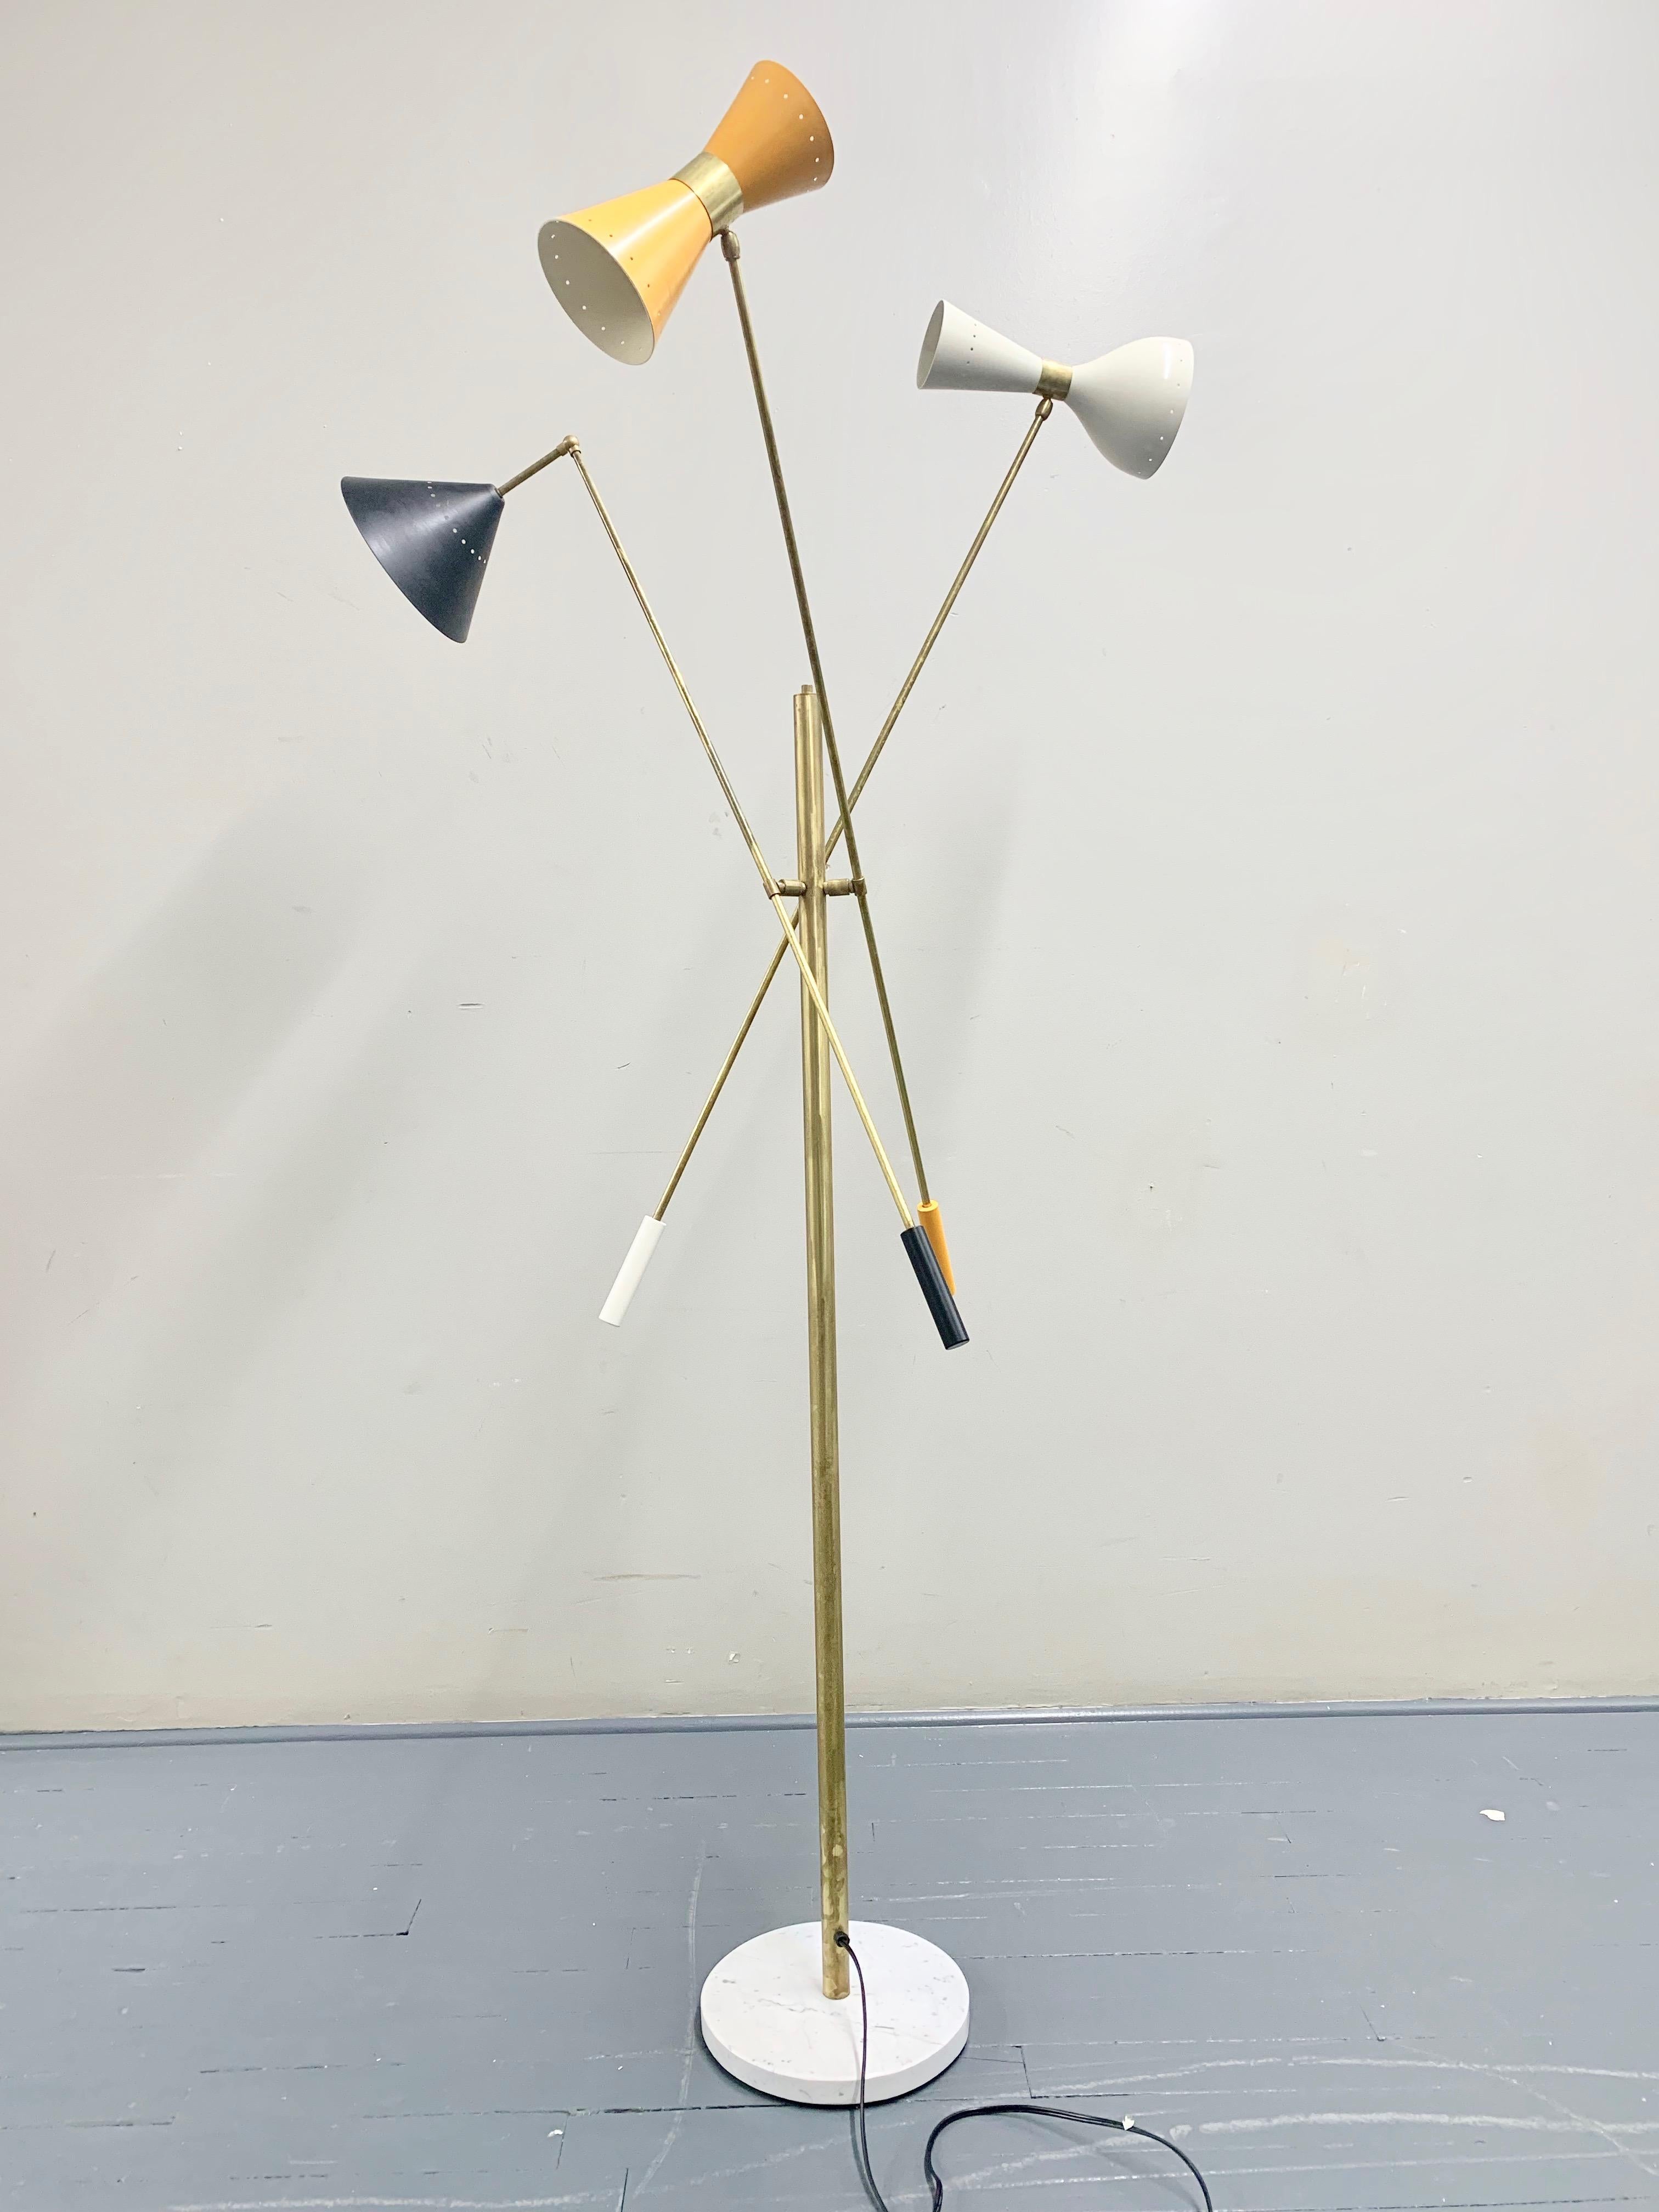 Italian midcentury style floor lamp adjustable three-arm lamp inspired by the Italian 1960s vintage iconic designs. Three different shades multi-color, Carrara marble base, arms and body made of solid brass and hand wax painted. Each arm features